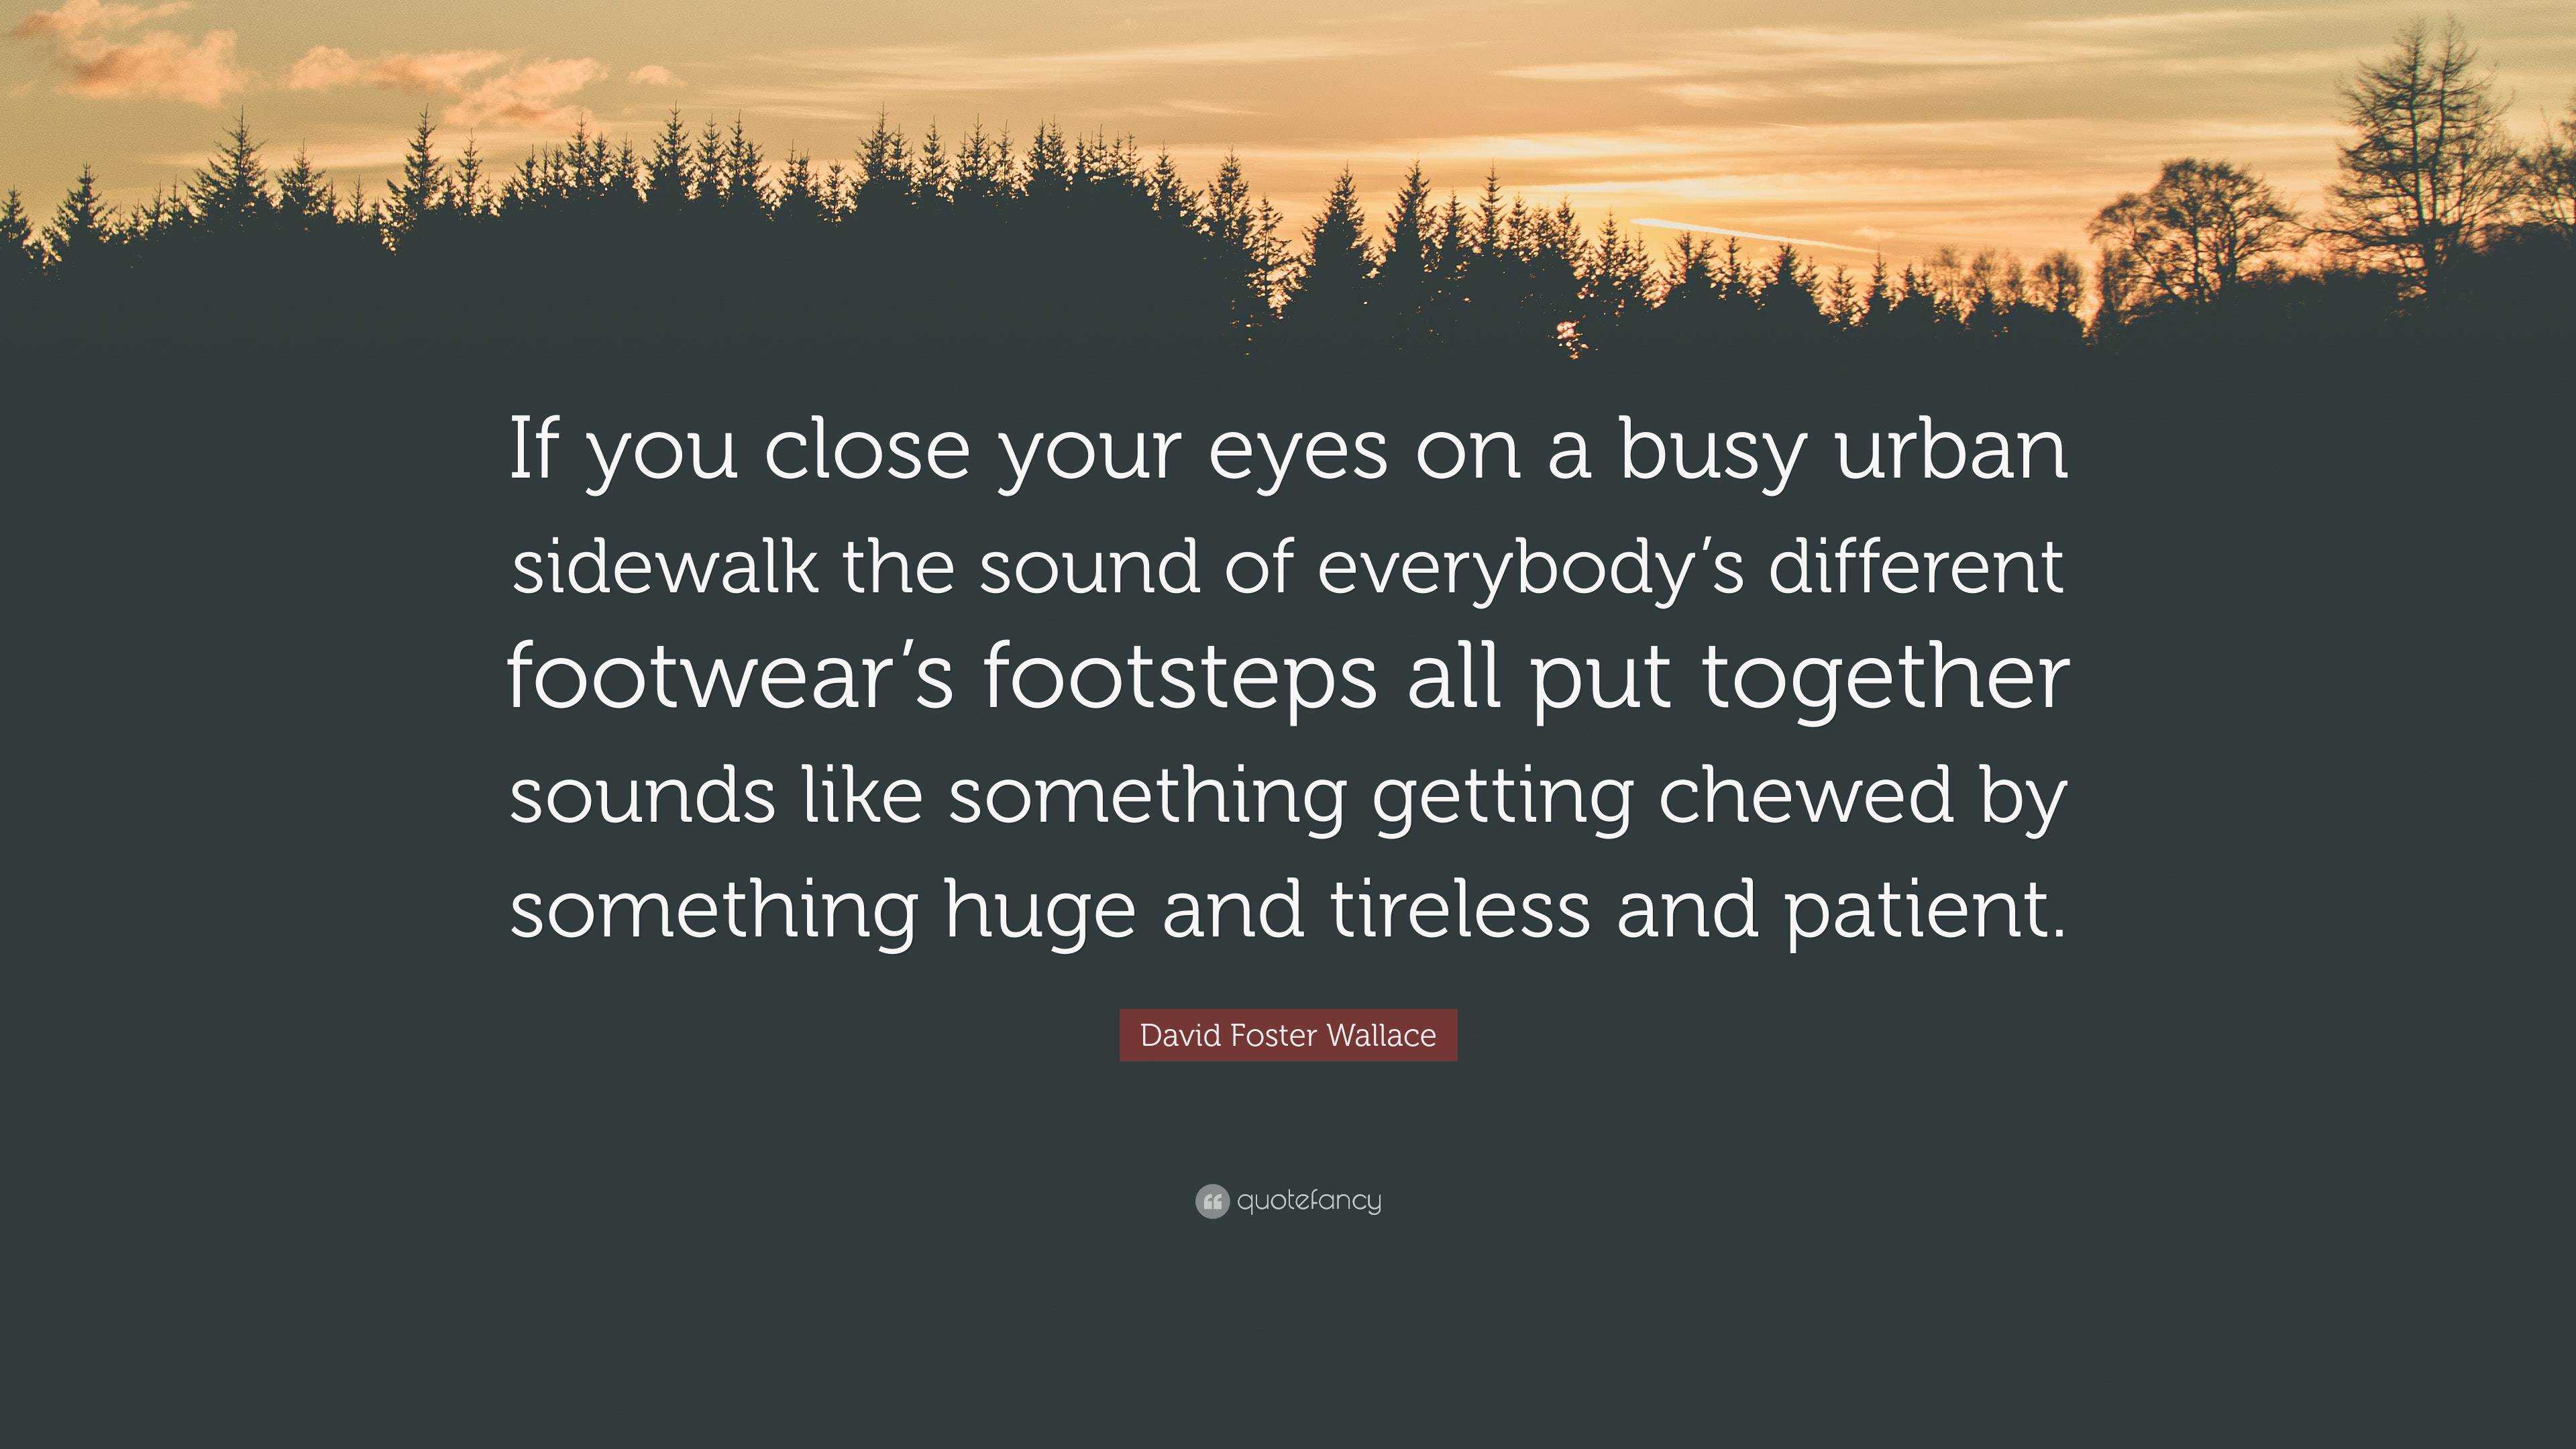 David Foster Wallace Quote: “If you close your eyes on a busy urban  sidewalk the sound of everybody's different footwear's footsteps all put  together”